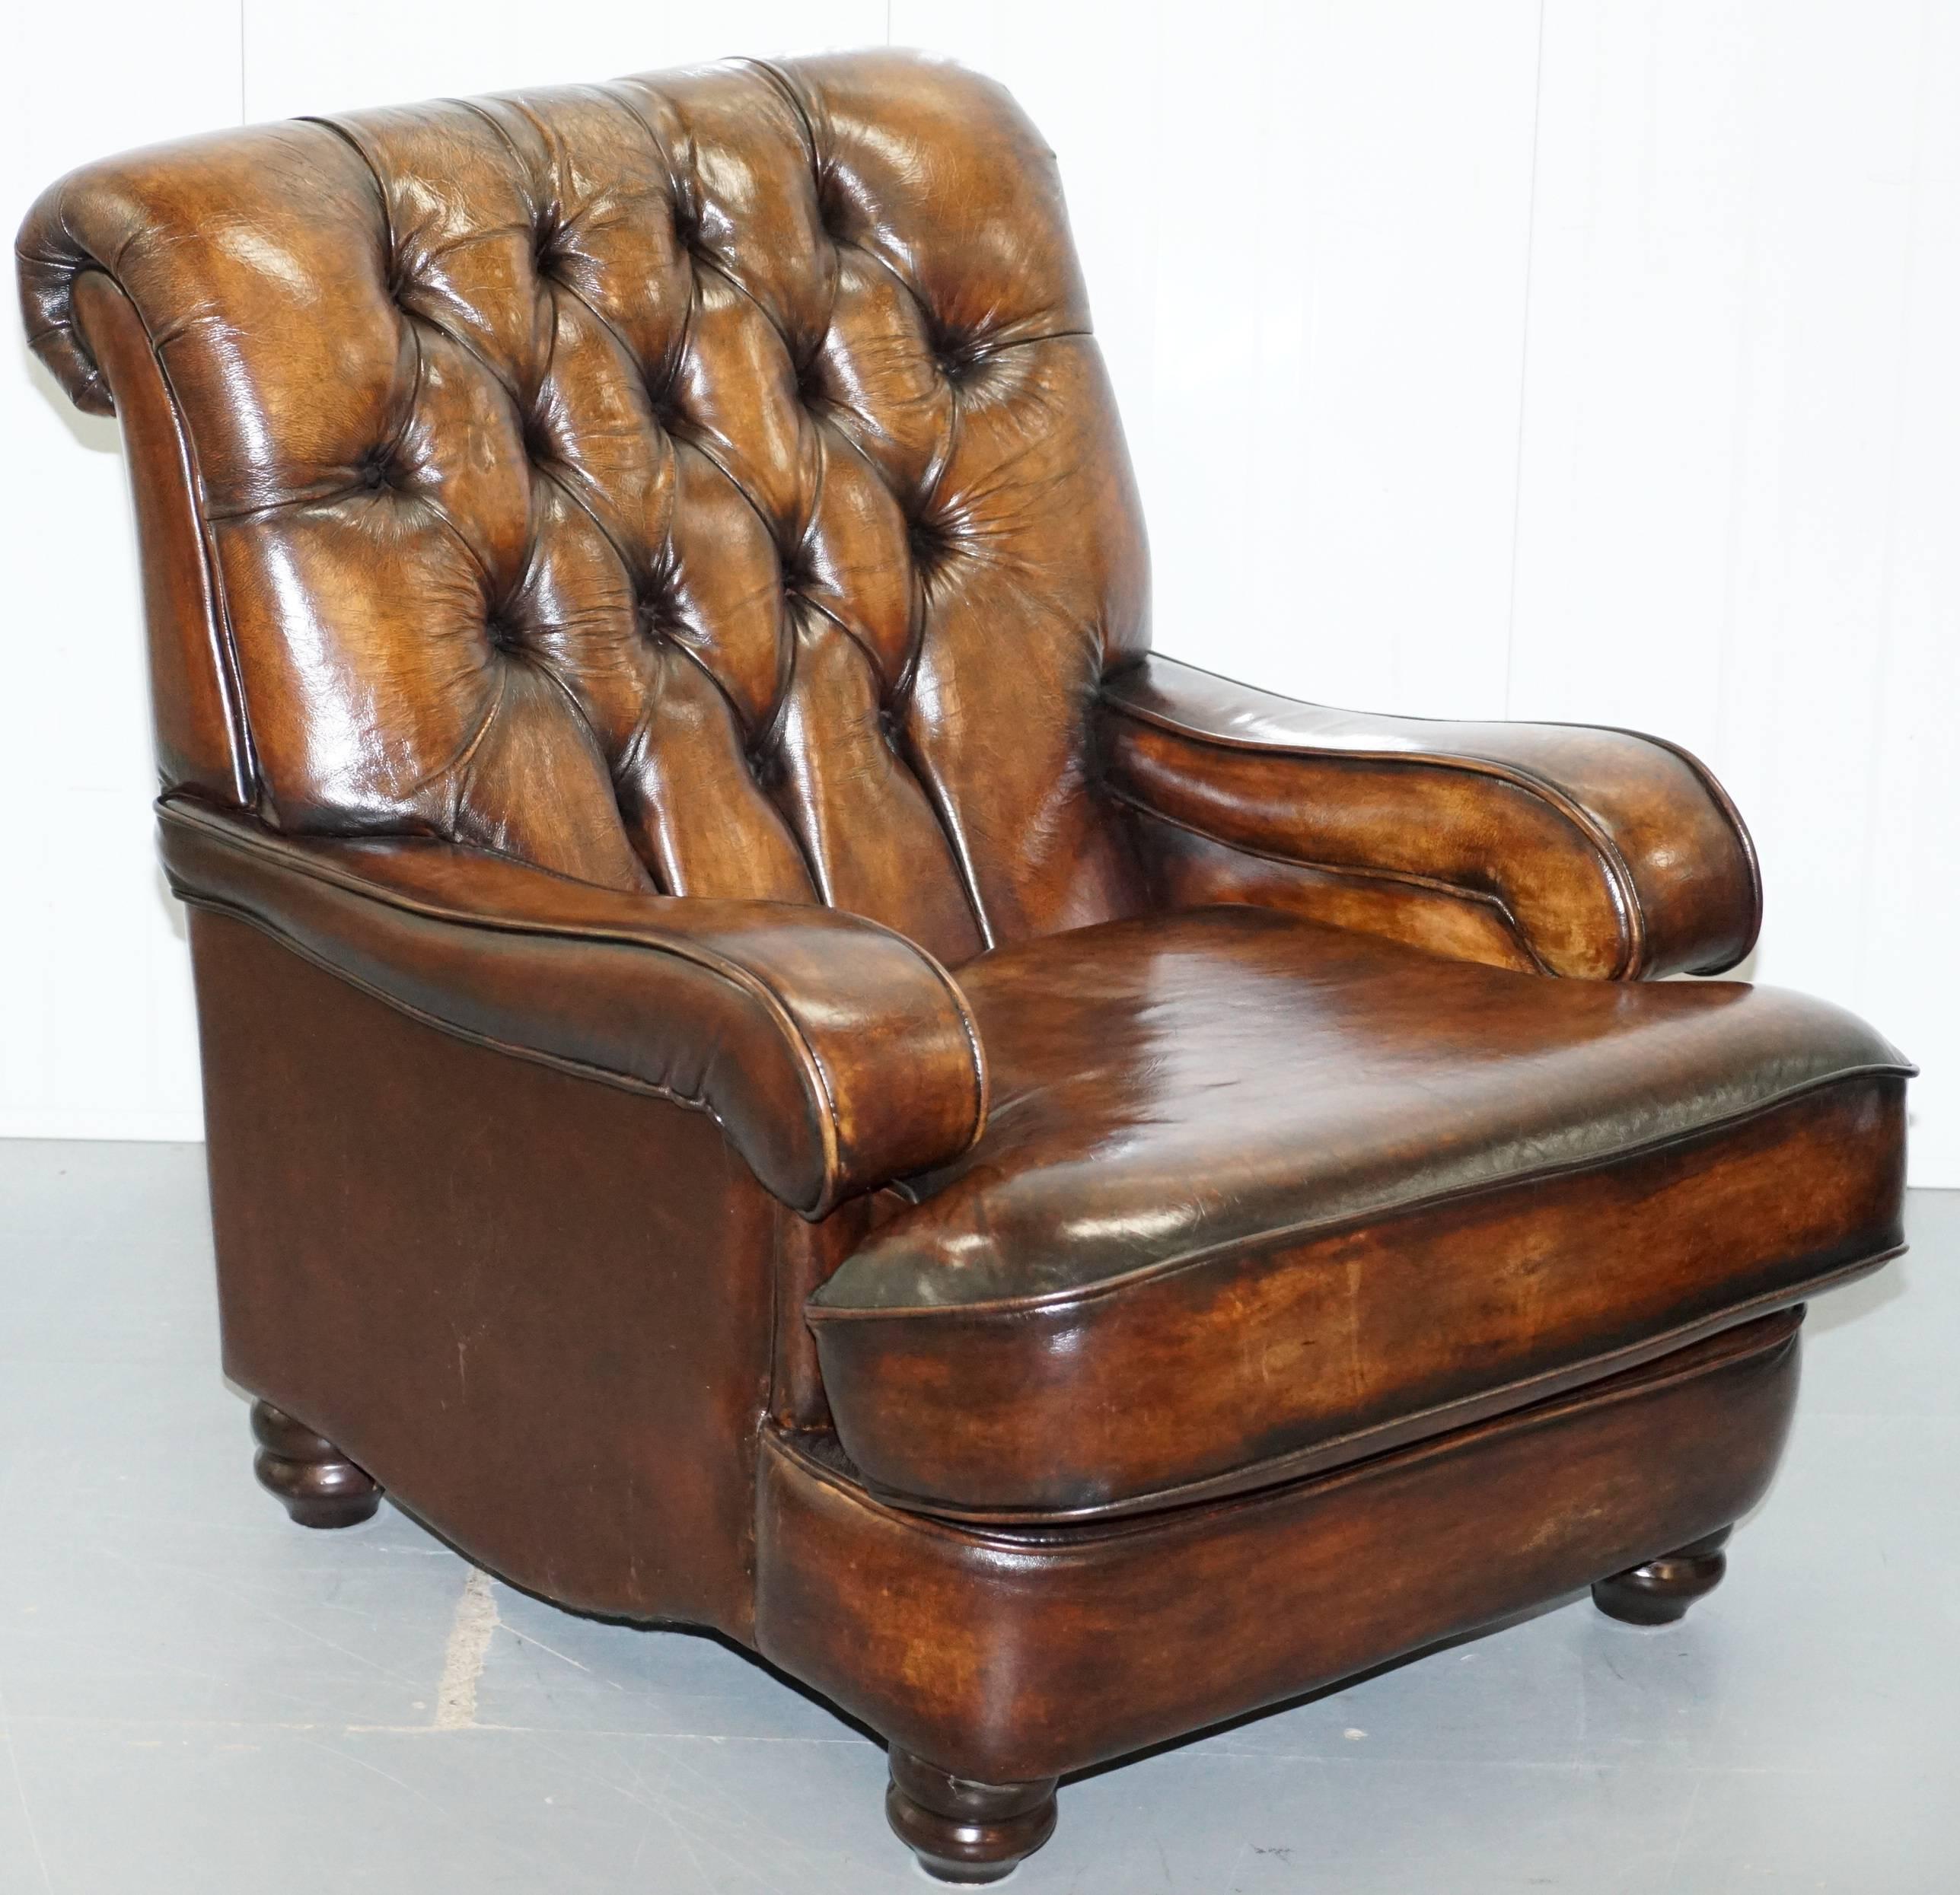 Wimbledon-Furniture is delighted to offer for sale this lovely pair of fully restored hand dyed cigar brown leather scroll back club armchairs with Chesterfield buttoning

A very good looking and comfortable pair of stylish and well-made leather